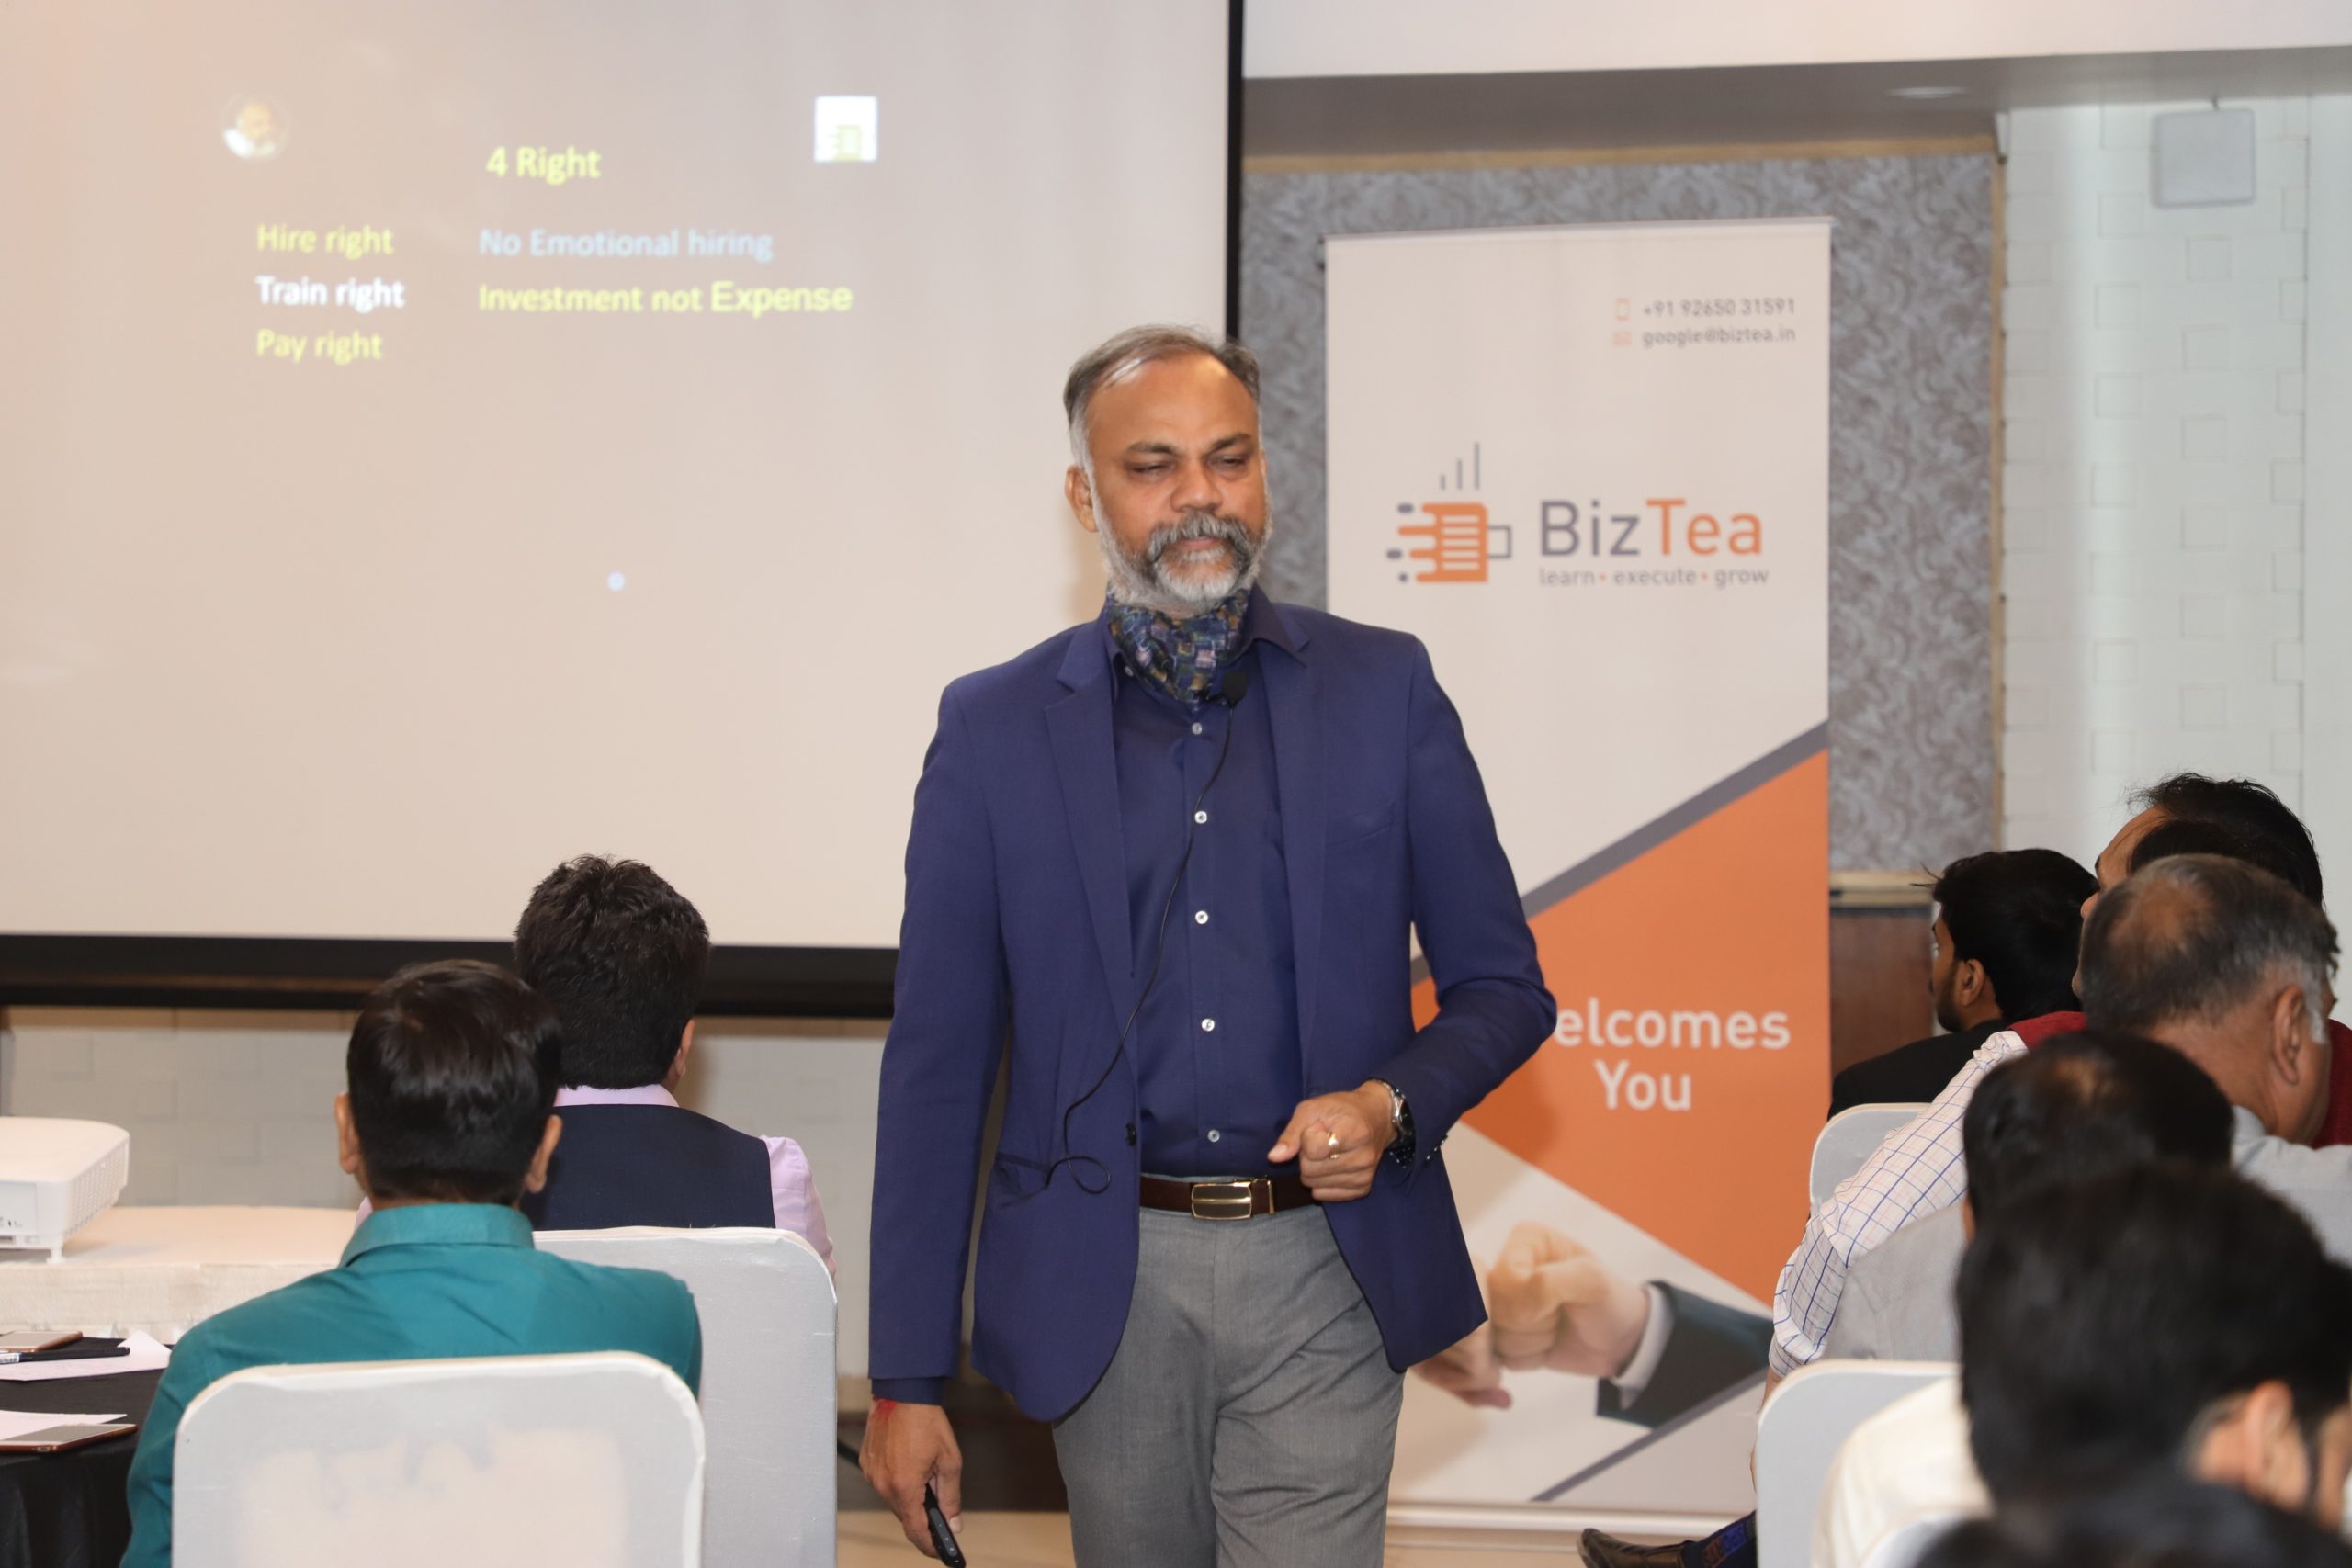 Mr. Deepak Makwana is very popular and successful business coach of India with an excellent trach record at BizTea
he is an expert of  "Value addition Kaise kare"